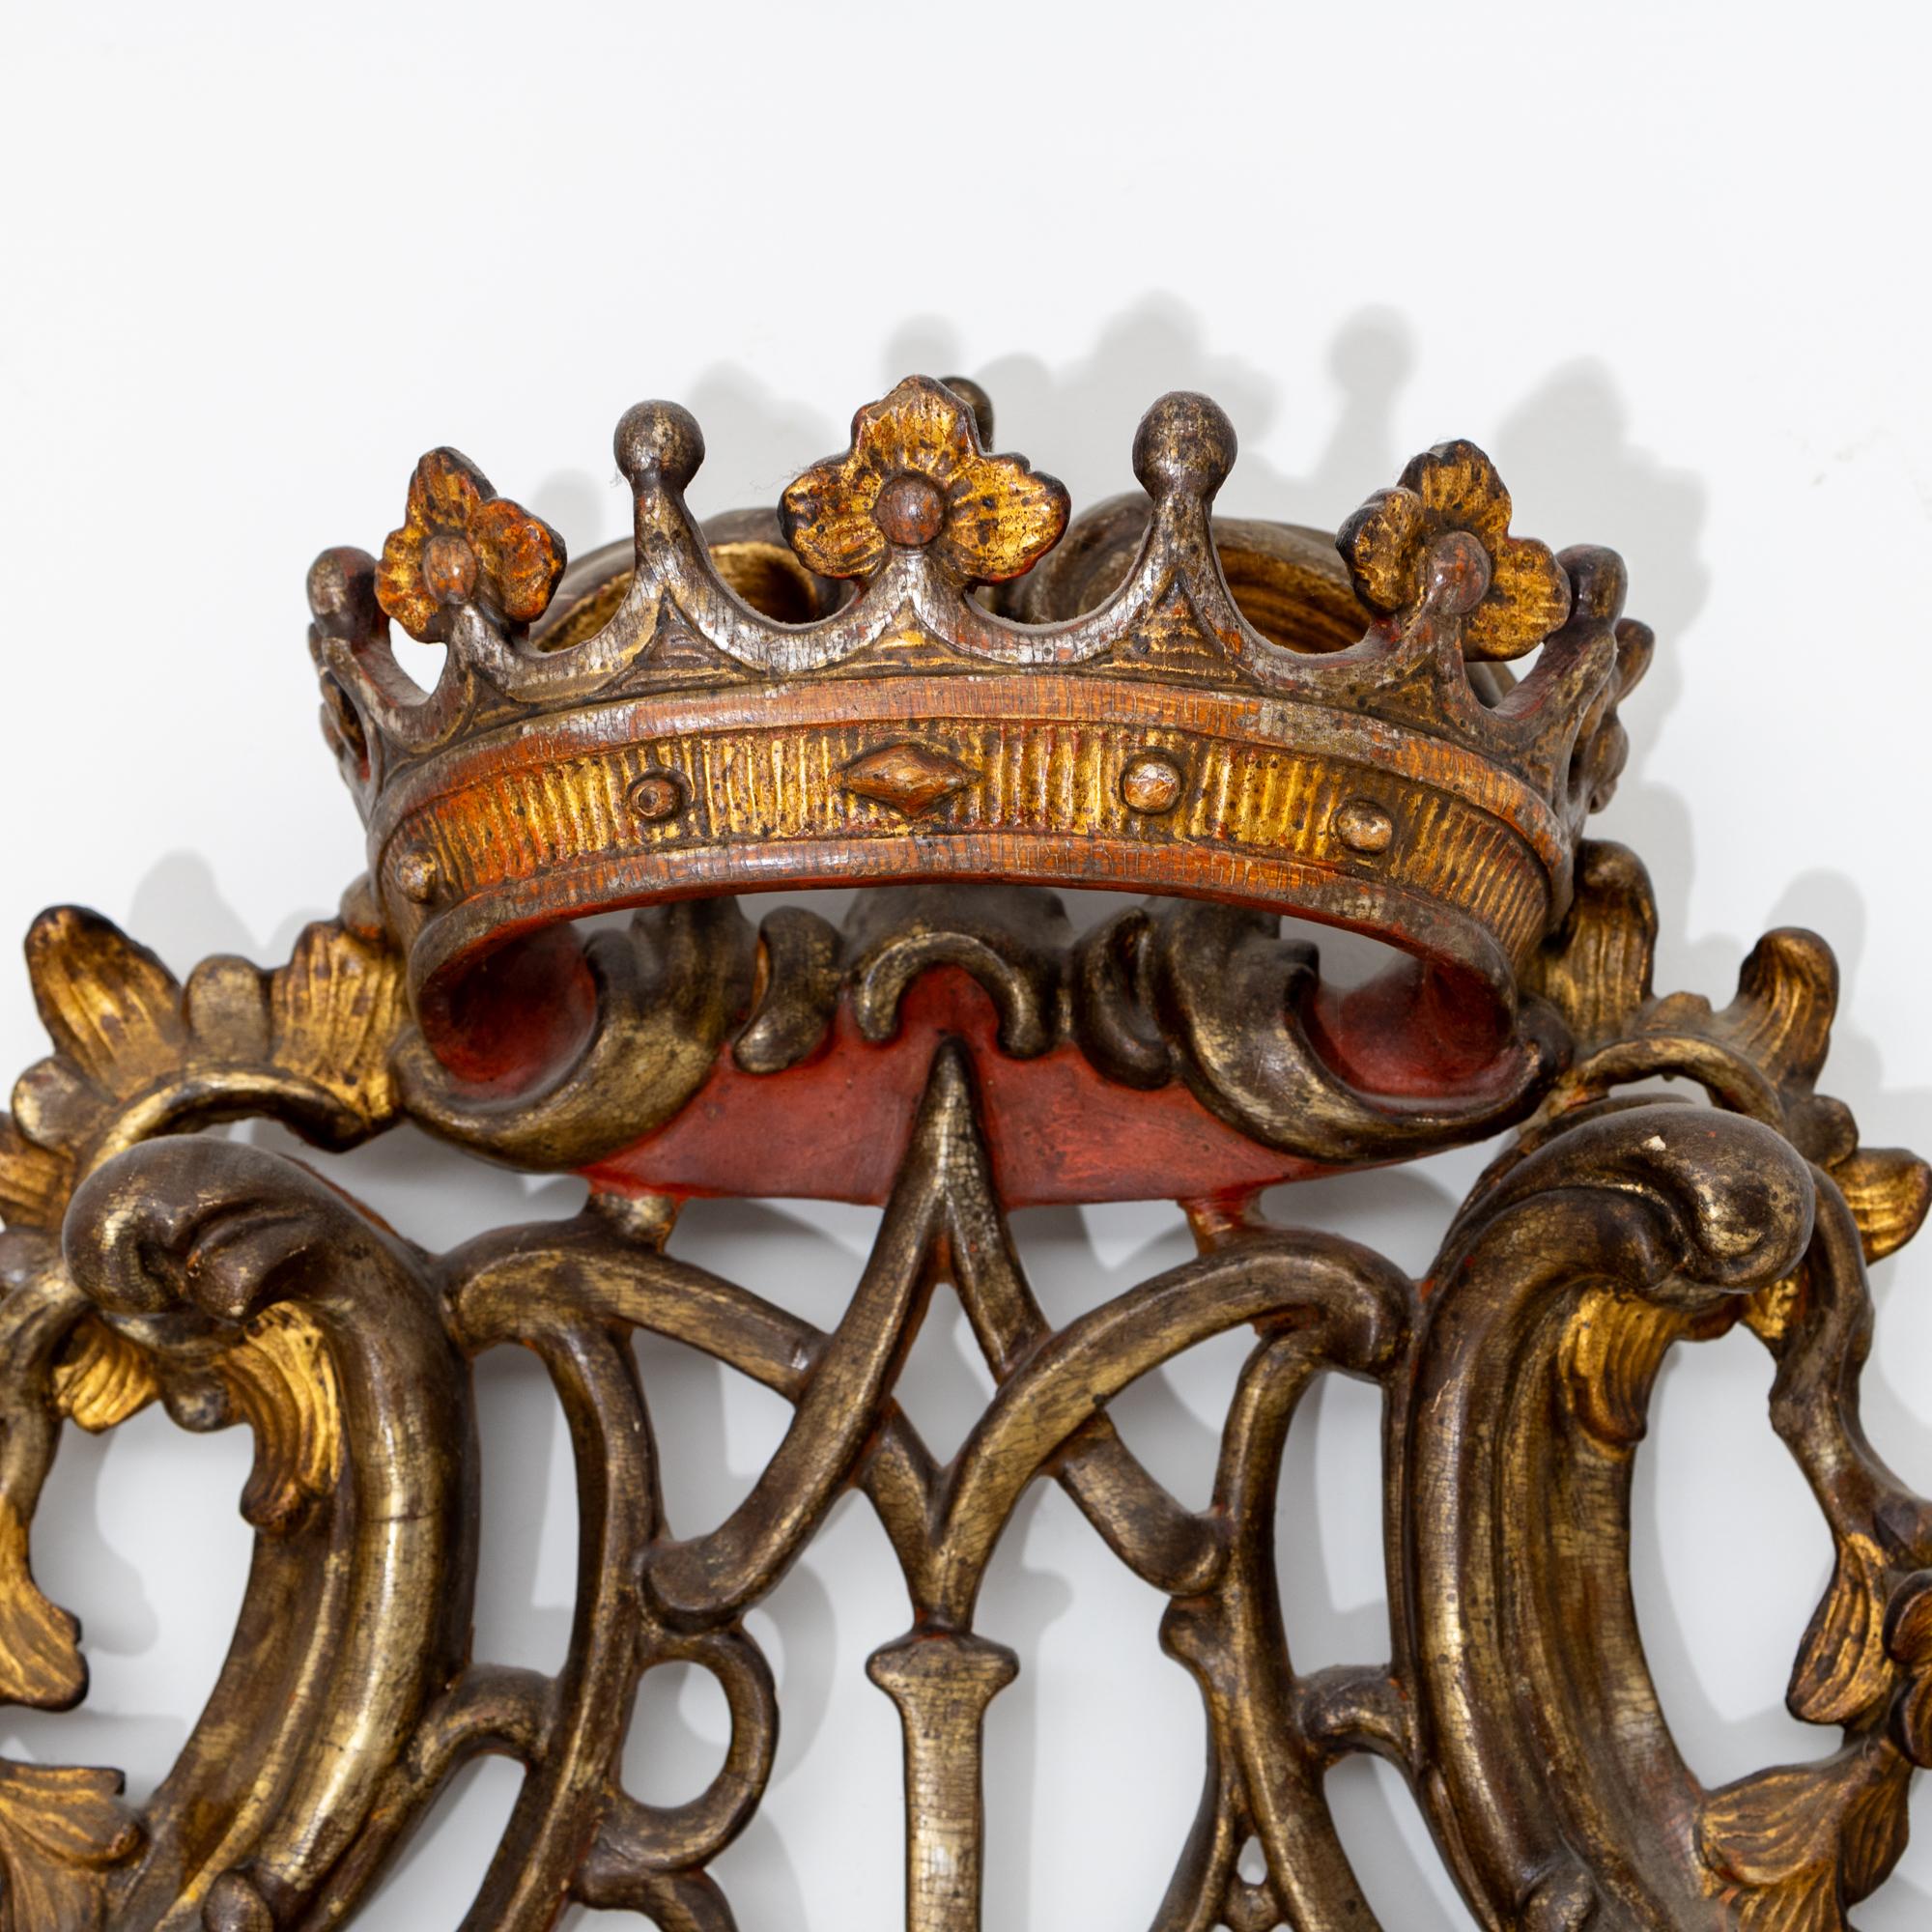 Rococo wall mirror in richly carved, silver and gold patinated wooden frame with rocailles and shell motifs. The frame is crowned by the three-dimensional crown protruding into the room above the monogram of the Virgin Mary.